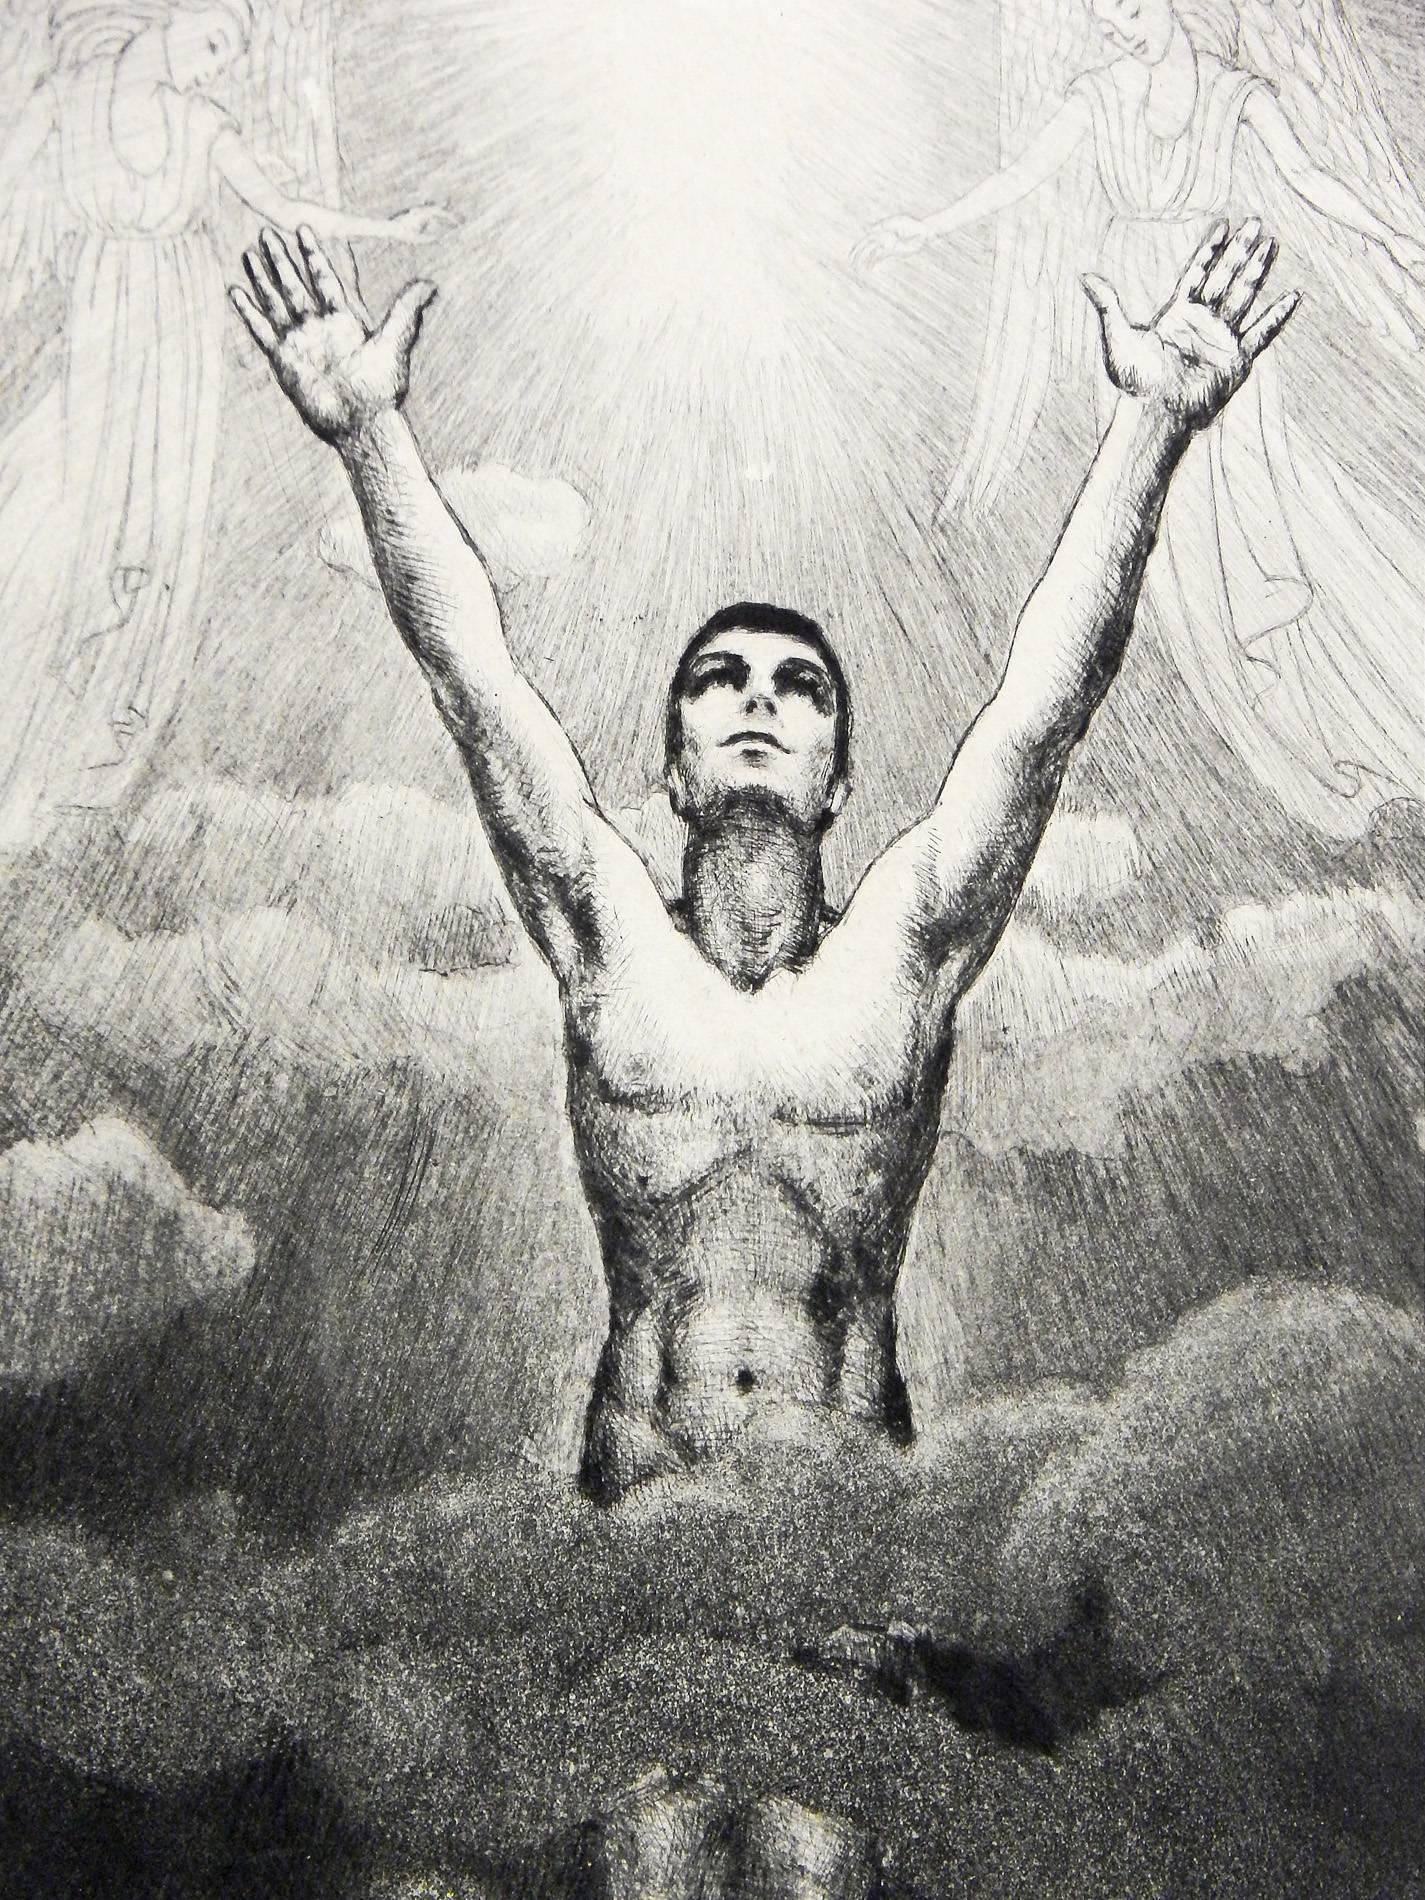 Buoyant and aspirational, this bold and rare print depicting man rising through the clouds toward heaven, with angels to either side, was created by Roselle Osk in the 1930s. Osk grew up in New York City and trained there, and later experienced